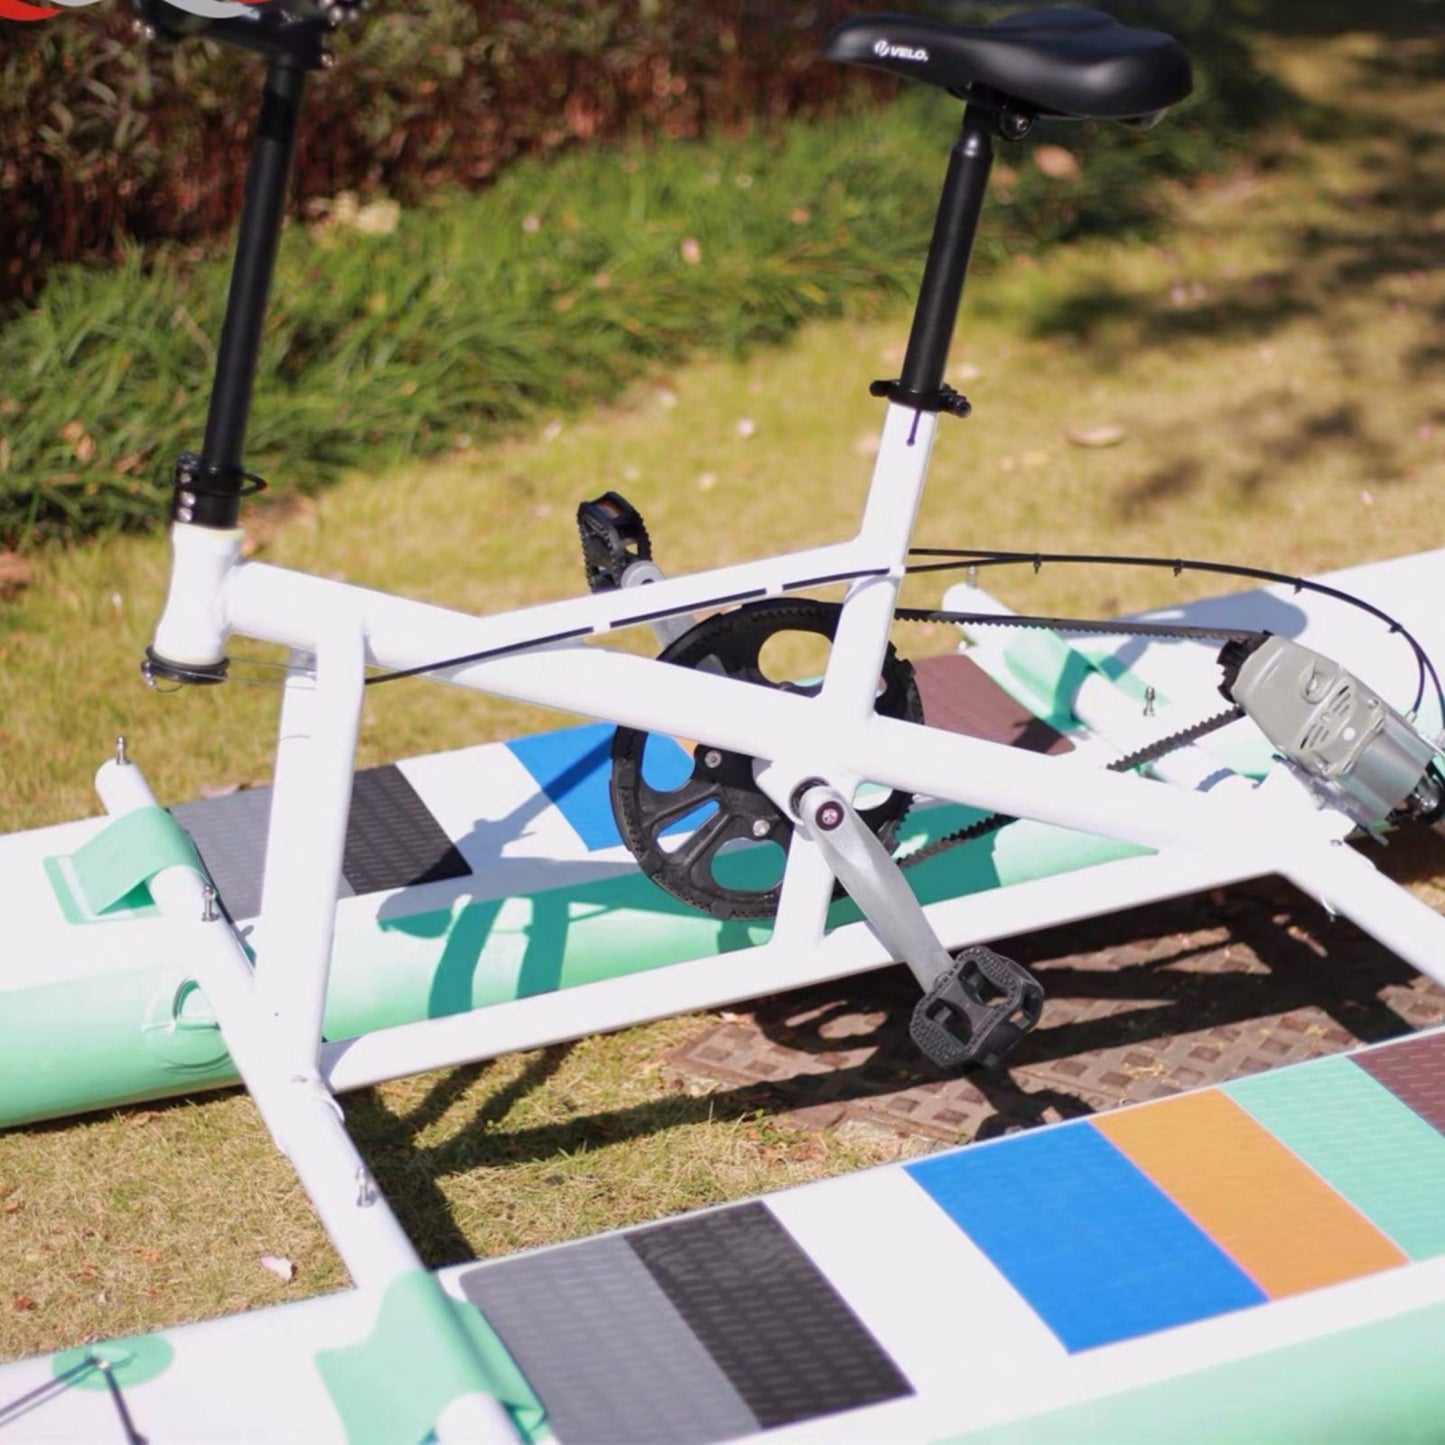 Transform Your Water Experience with the Portable Water Bike and Paddle Board Combination